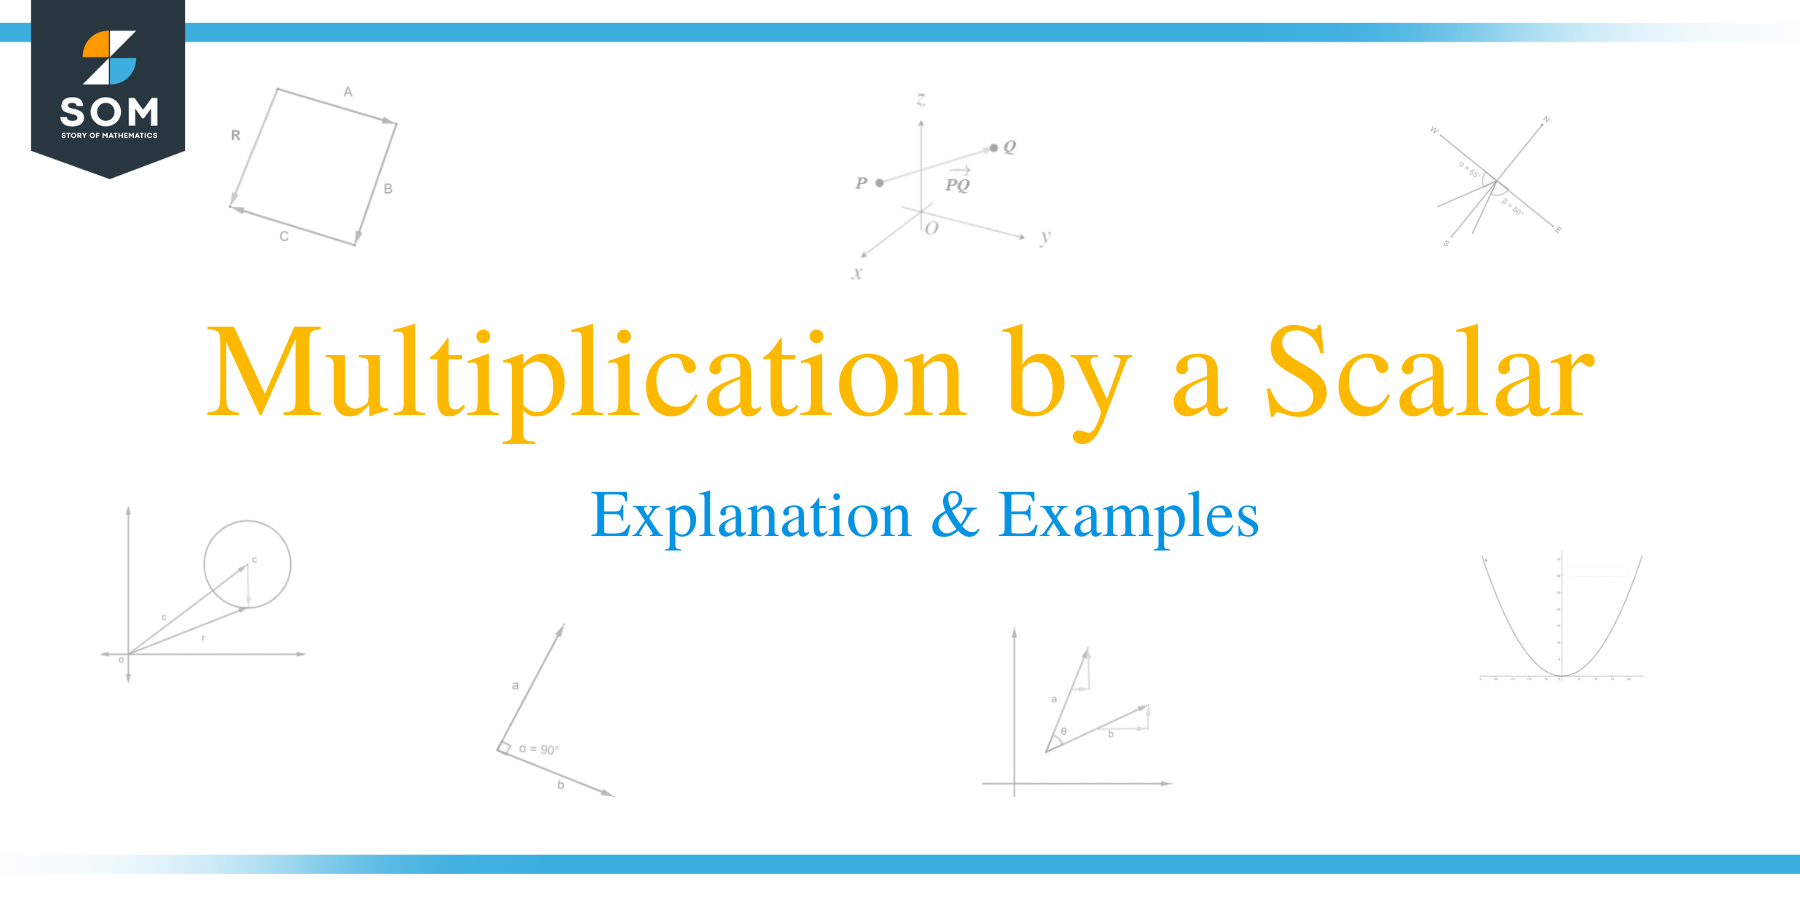 Multiplication by a Scalar